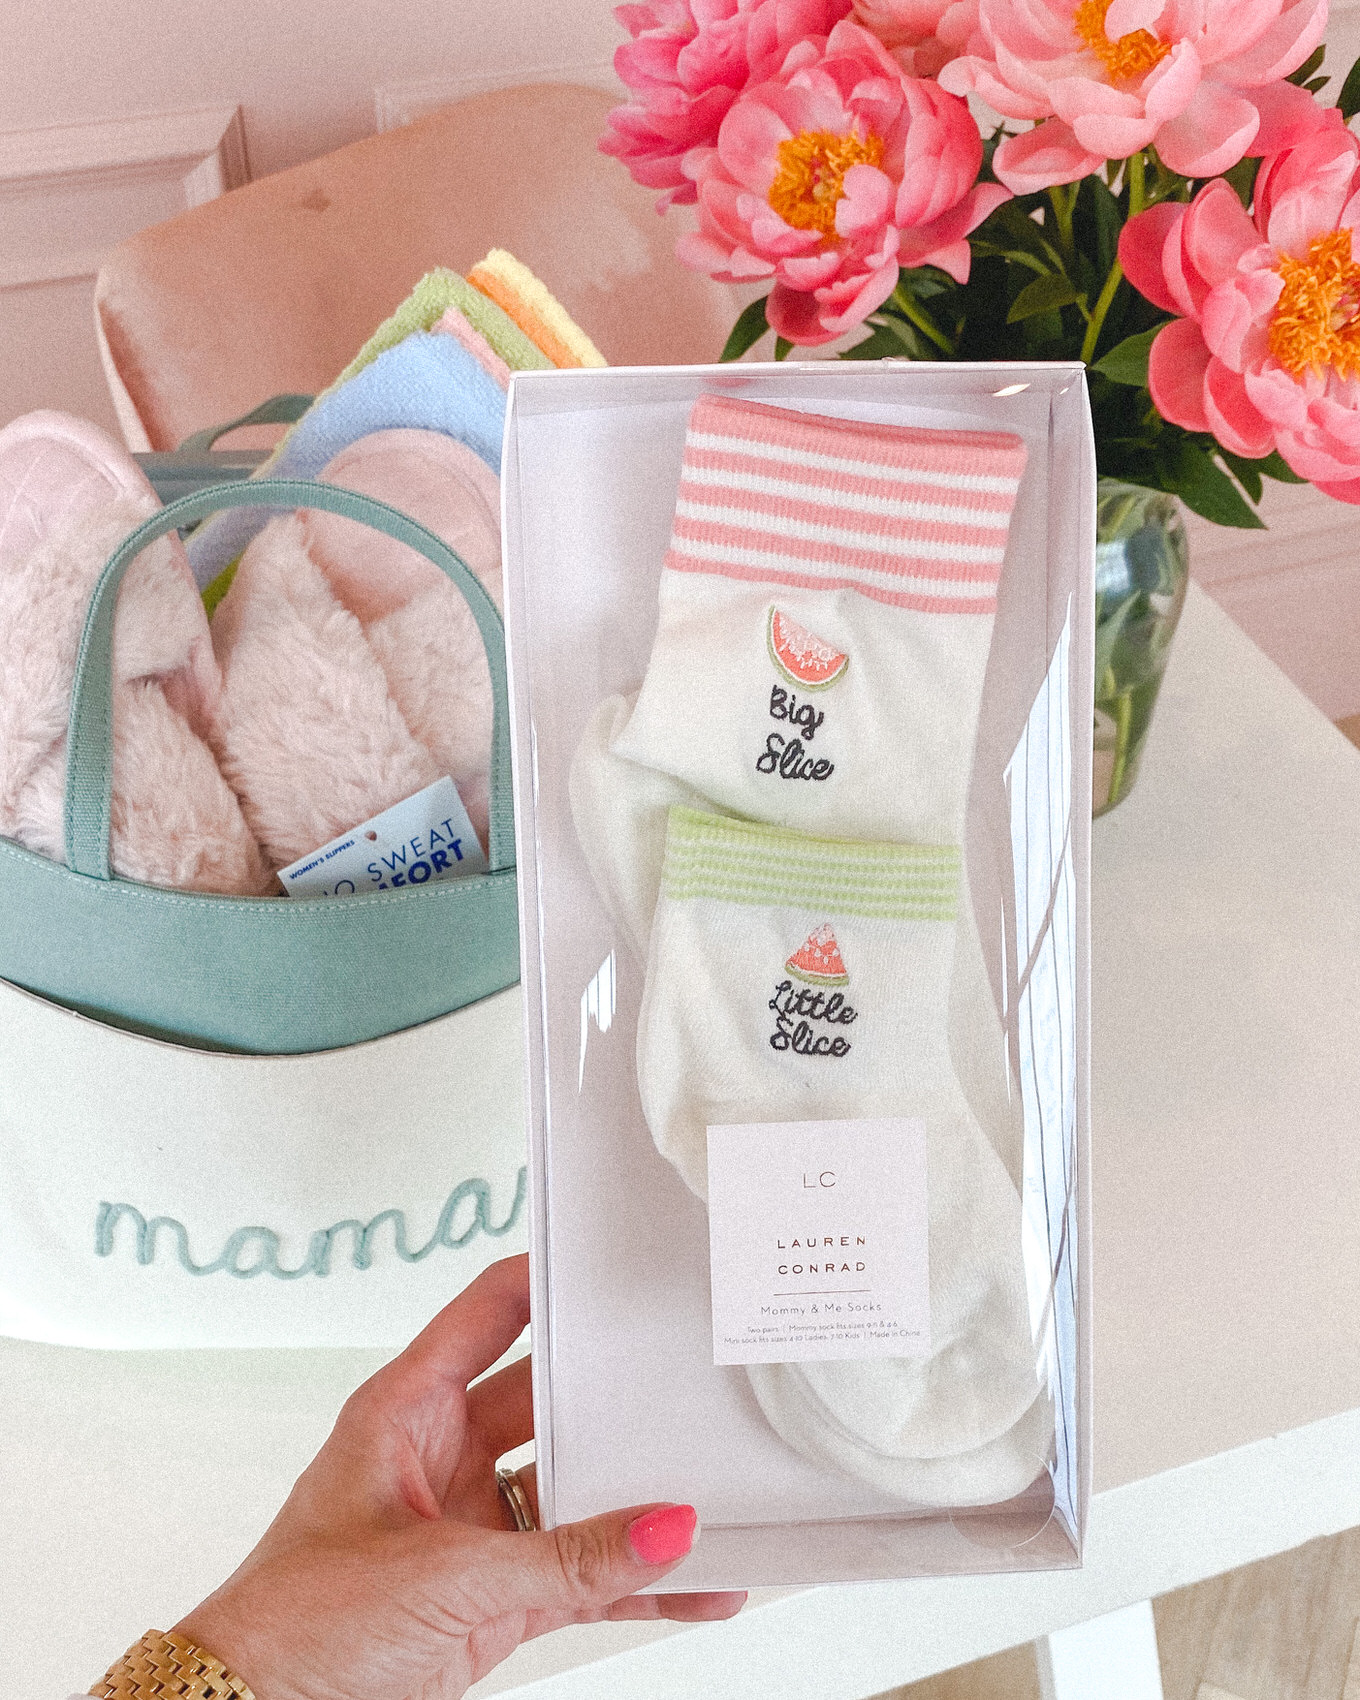 thoughful gifts for mom for mother's day